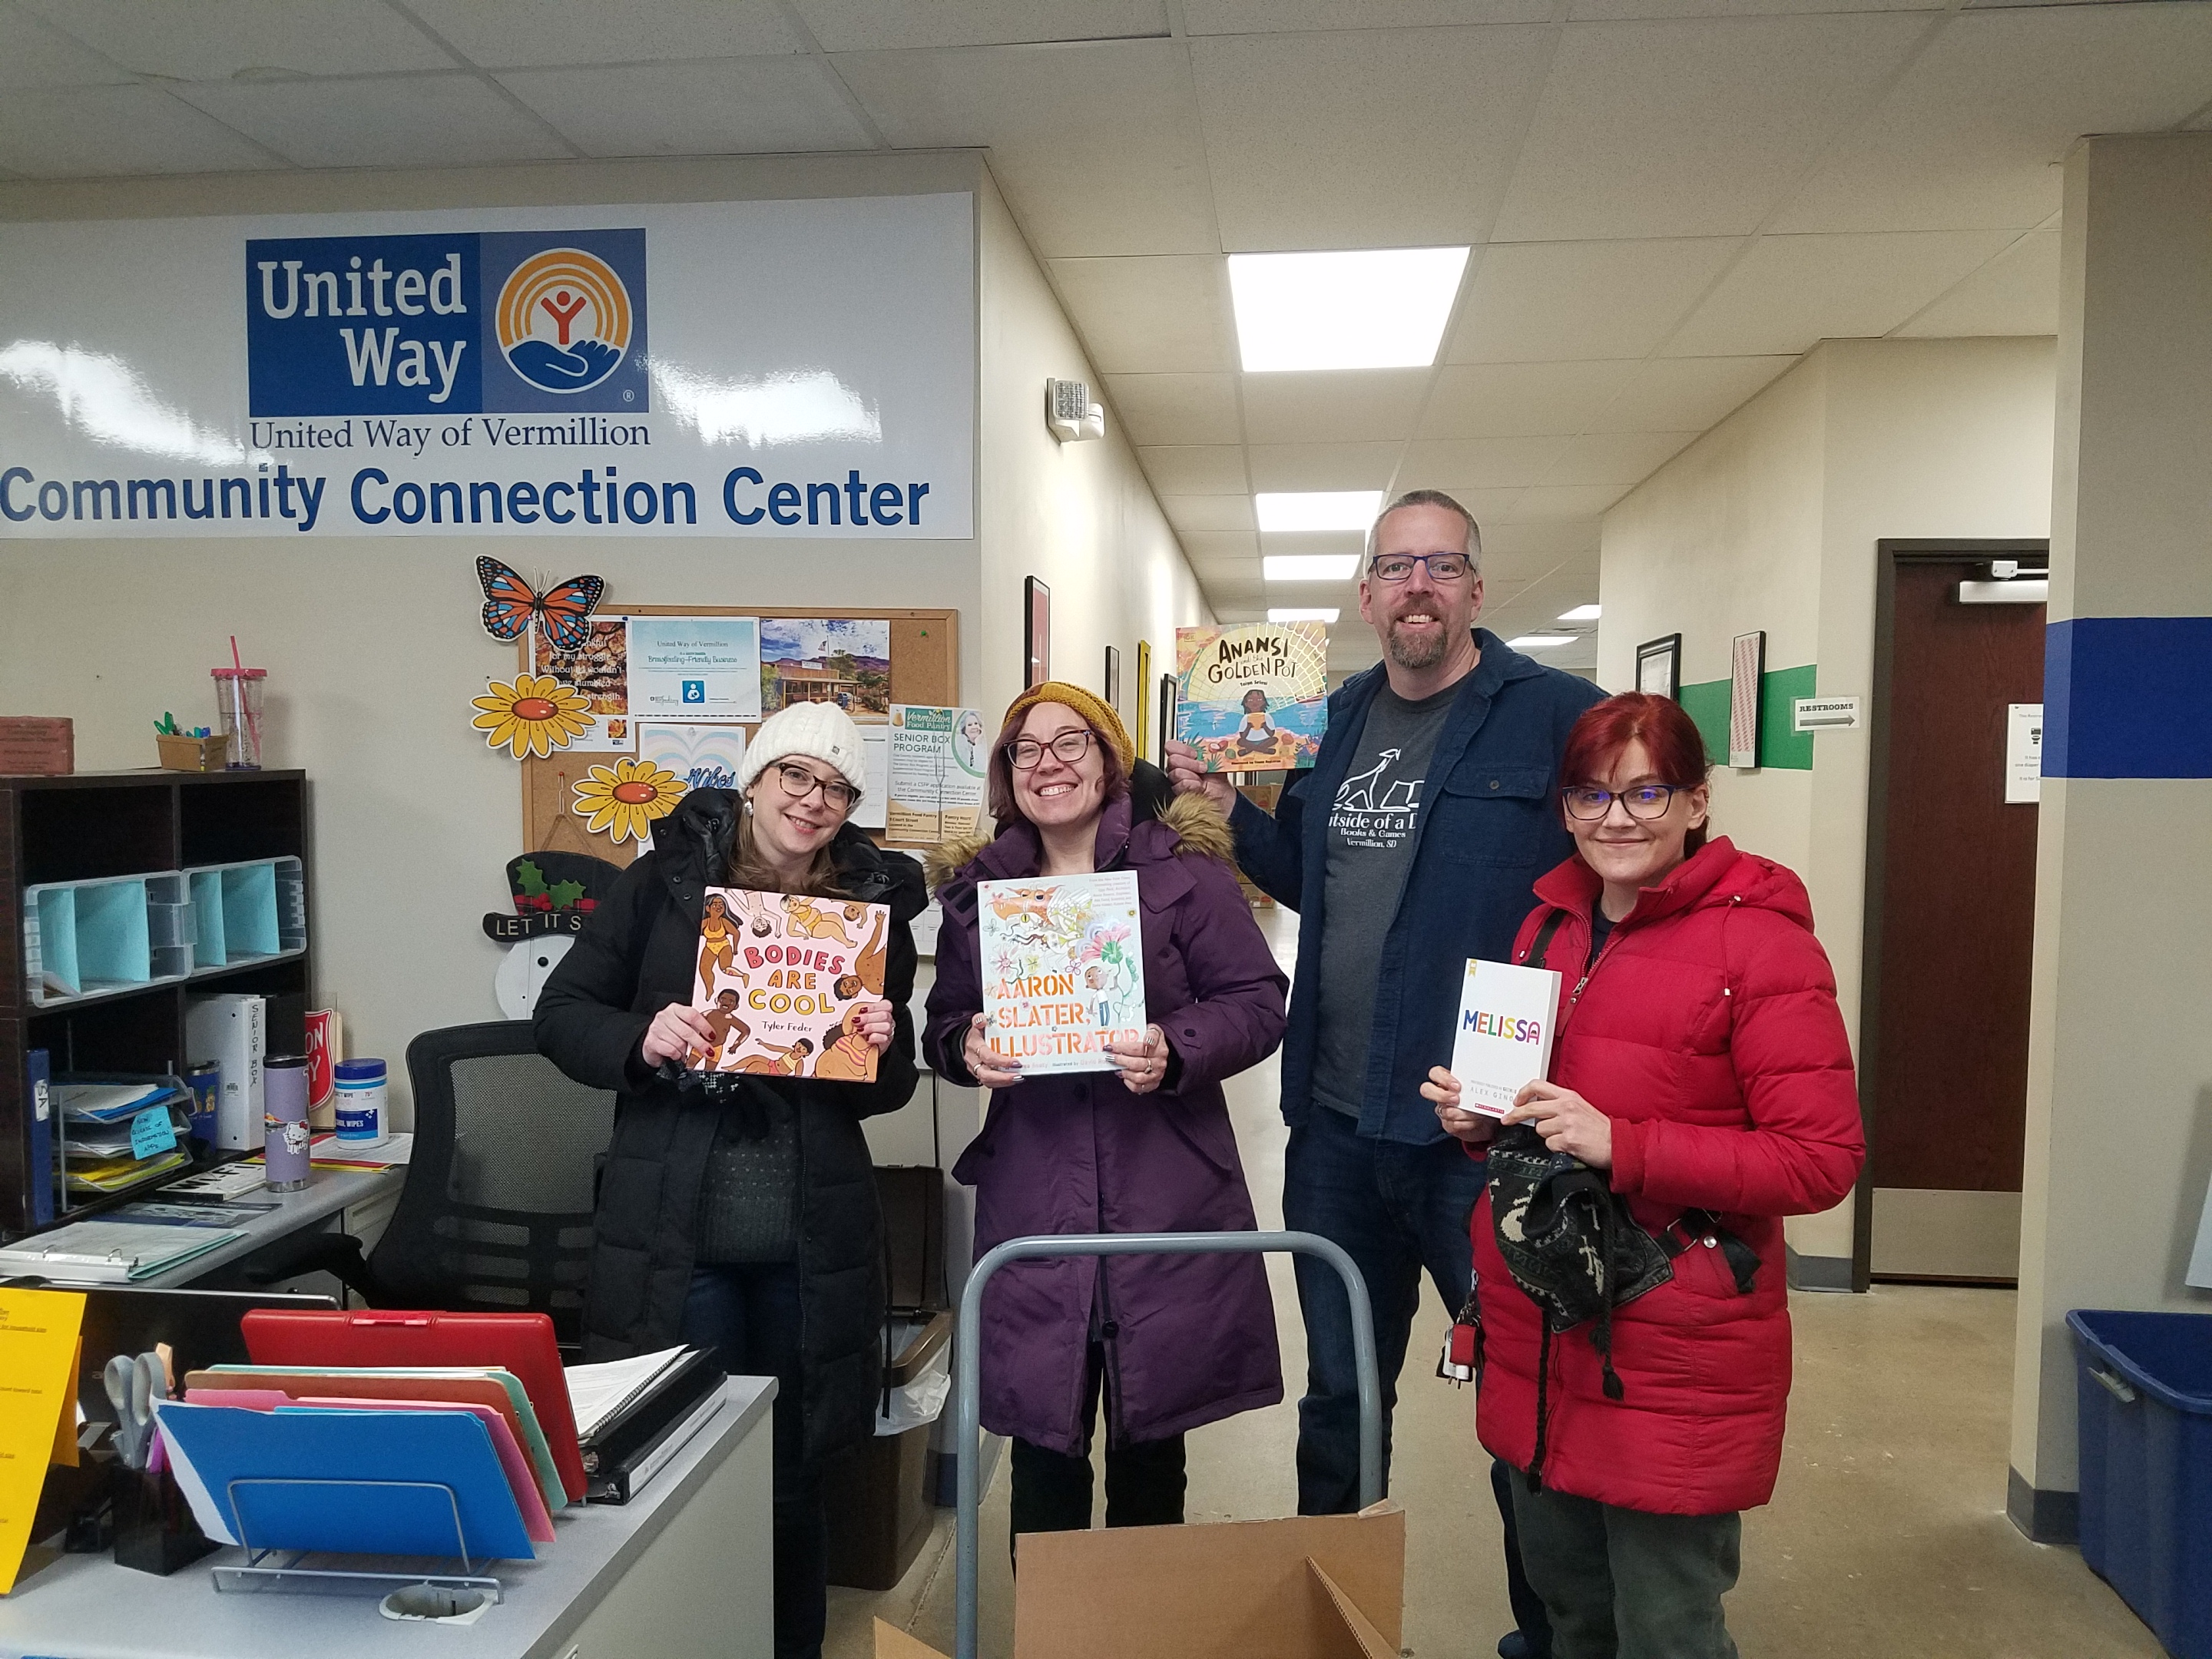 Smiling people holding donated children's books in the United Way Community Connection Center